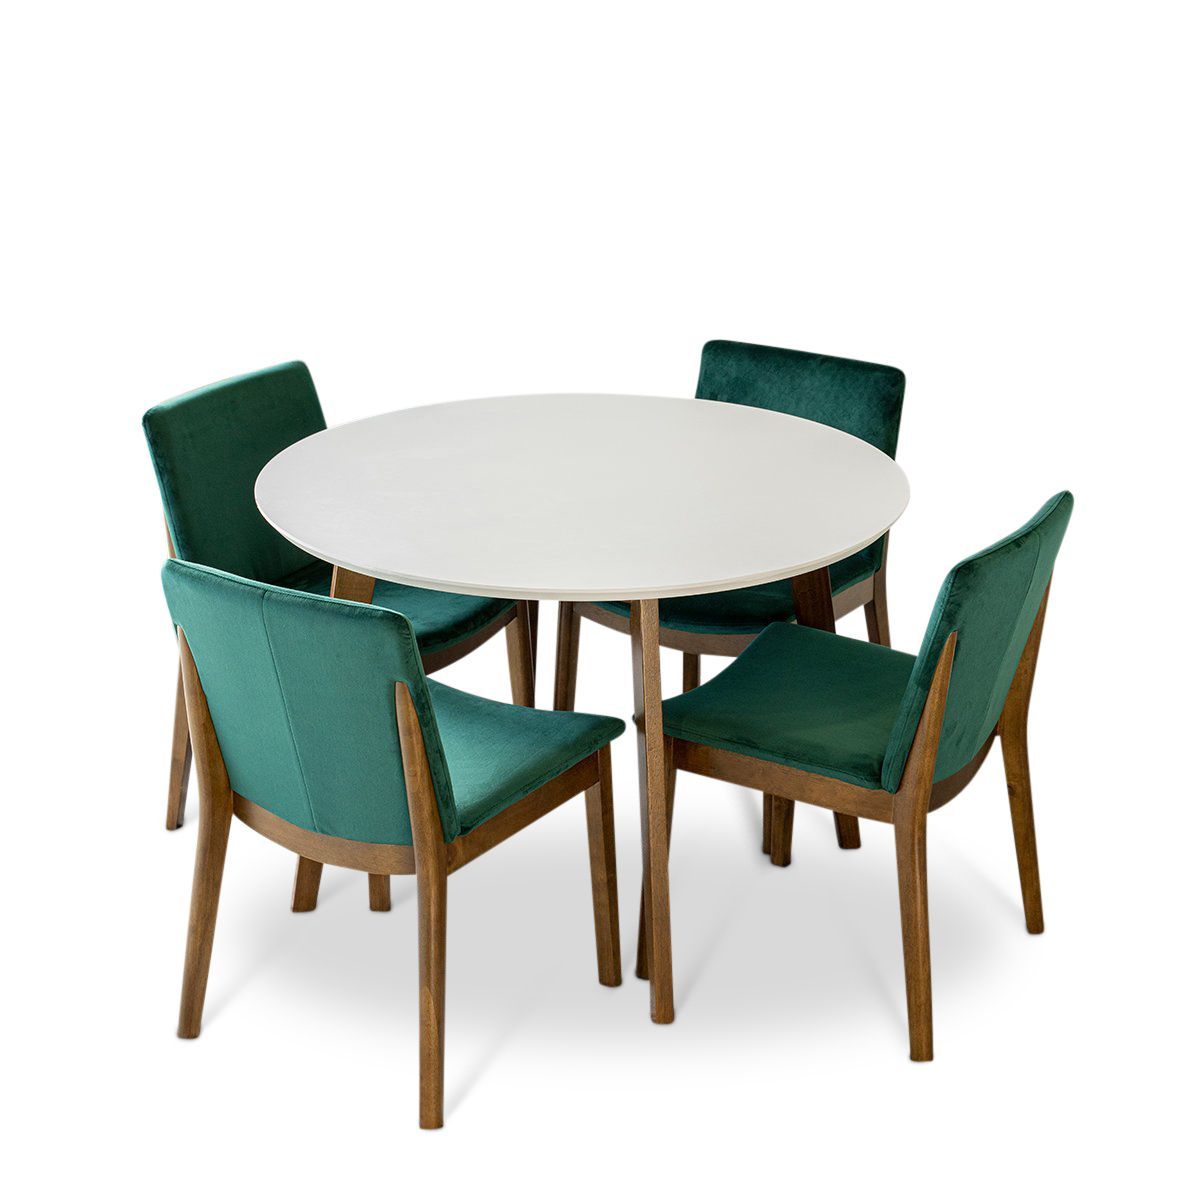 Aliana Dining set with 4 Virginia Green Chairs (White)